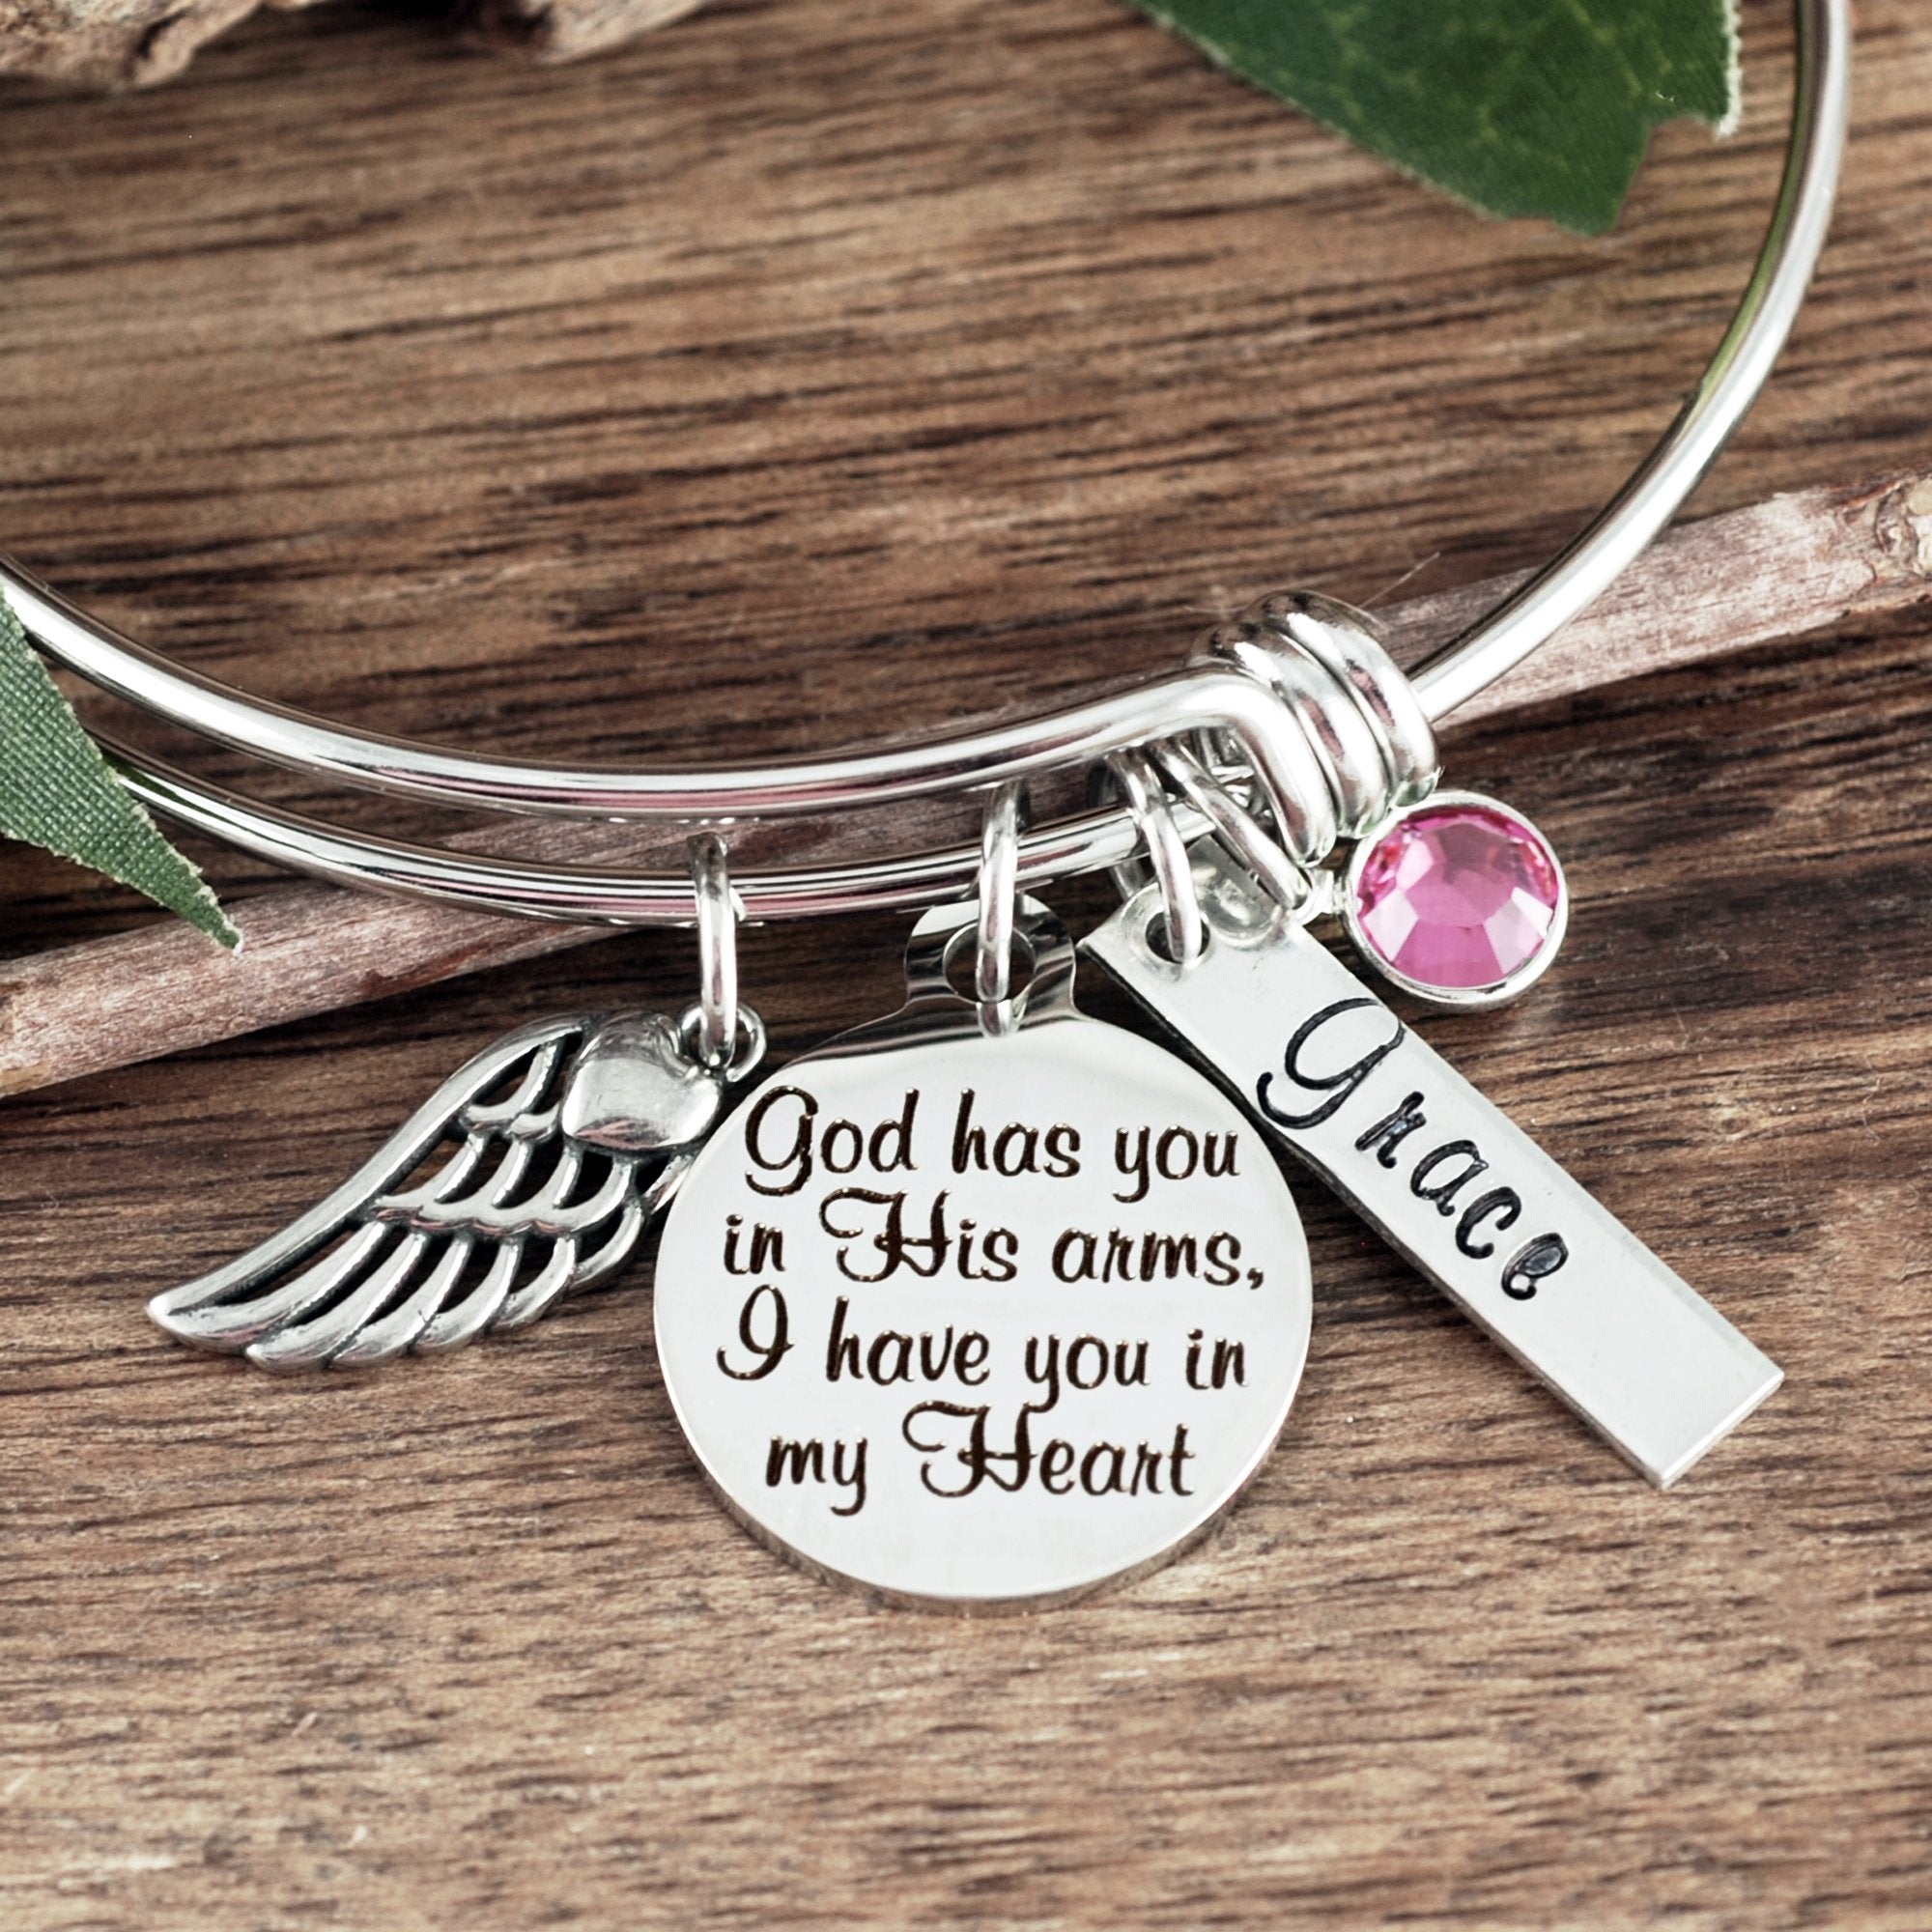 FOREVER IN MY HEART LOCKET BRACELET IN SILVER - Shop Around the